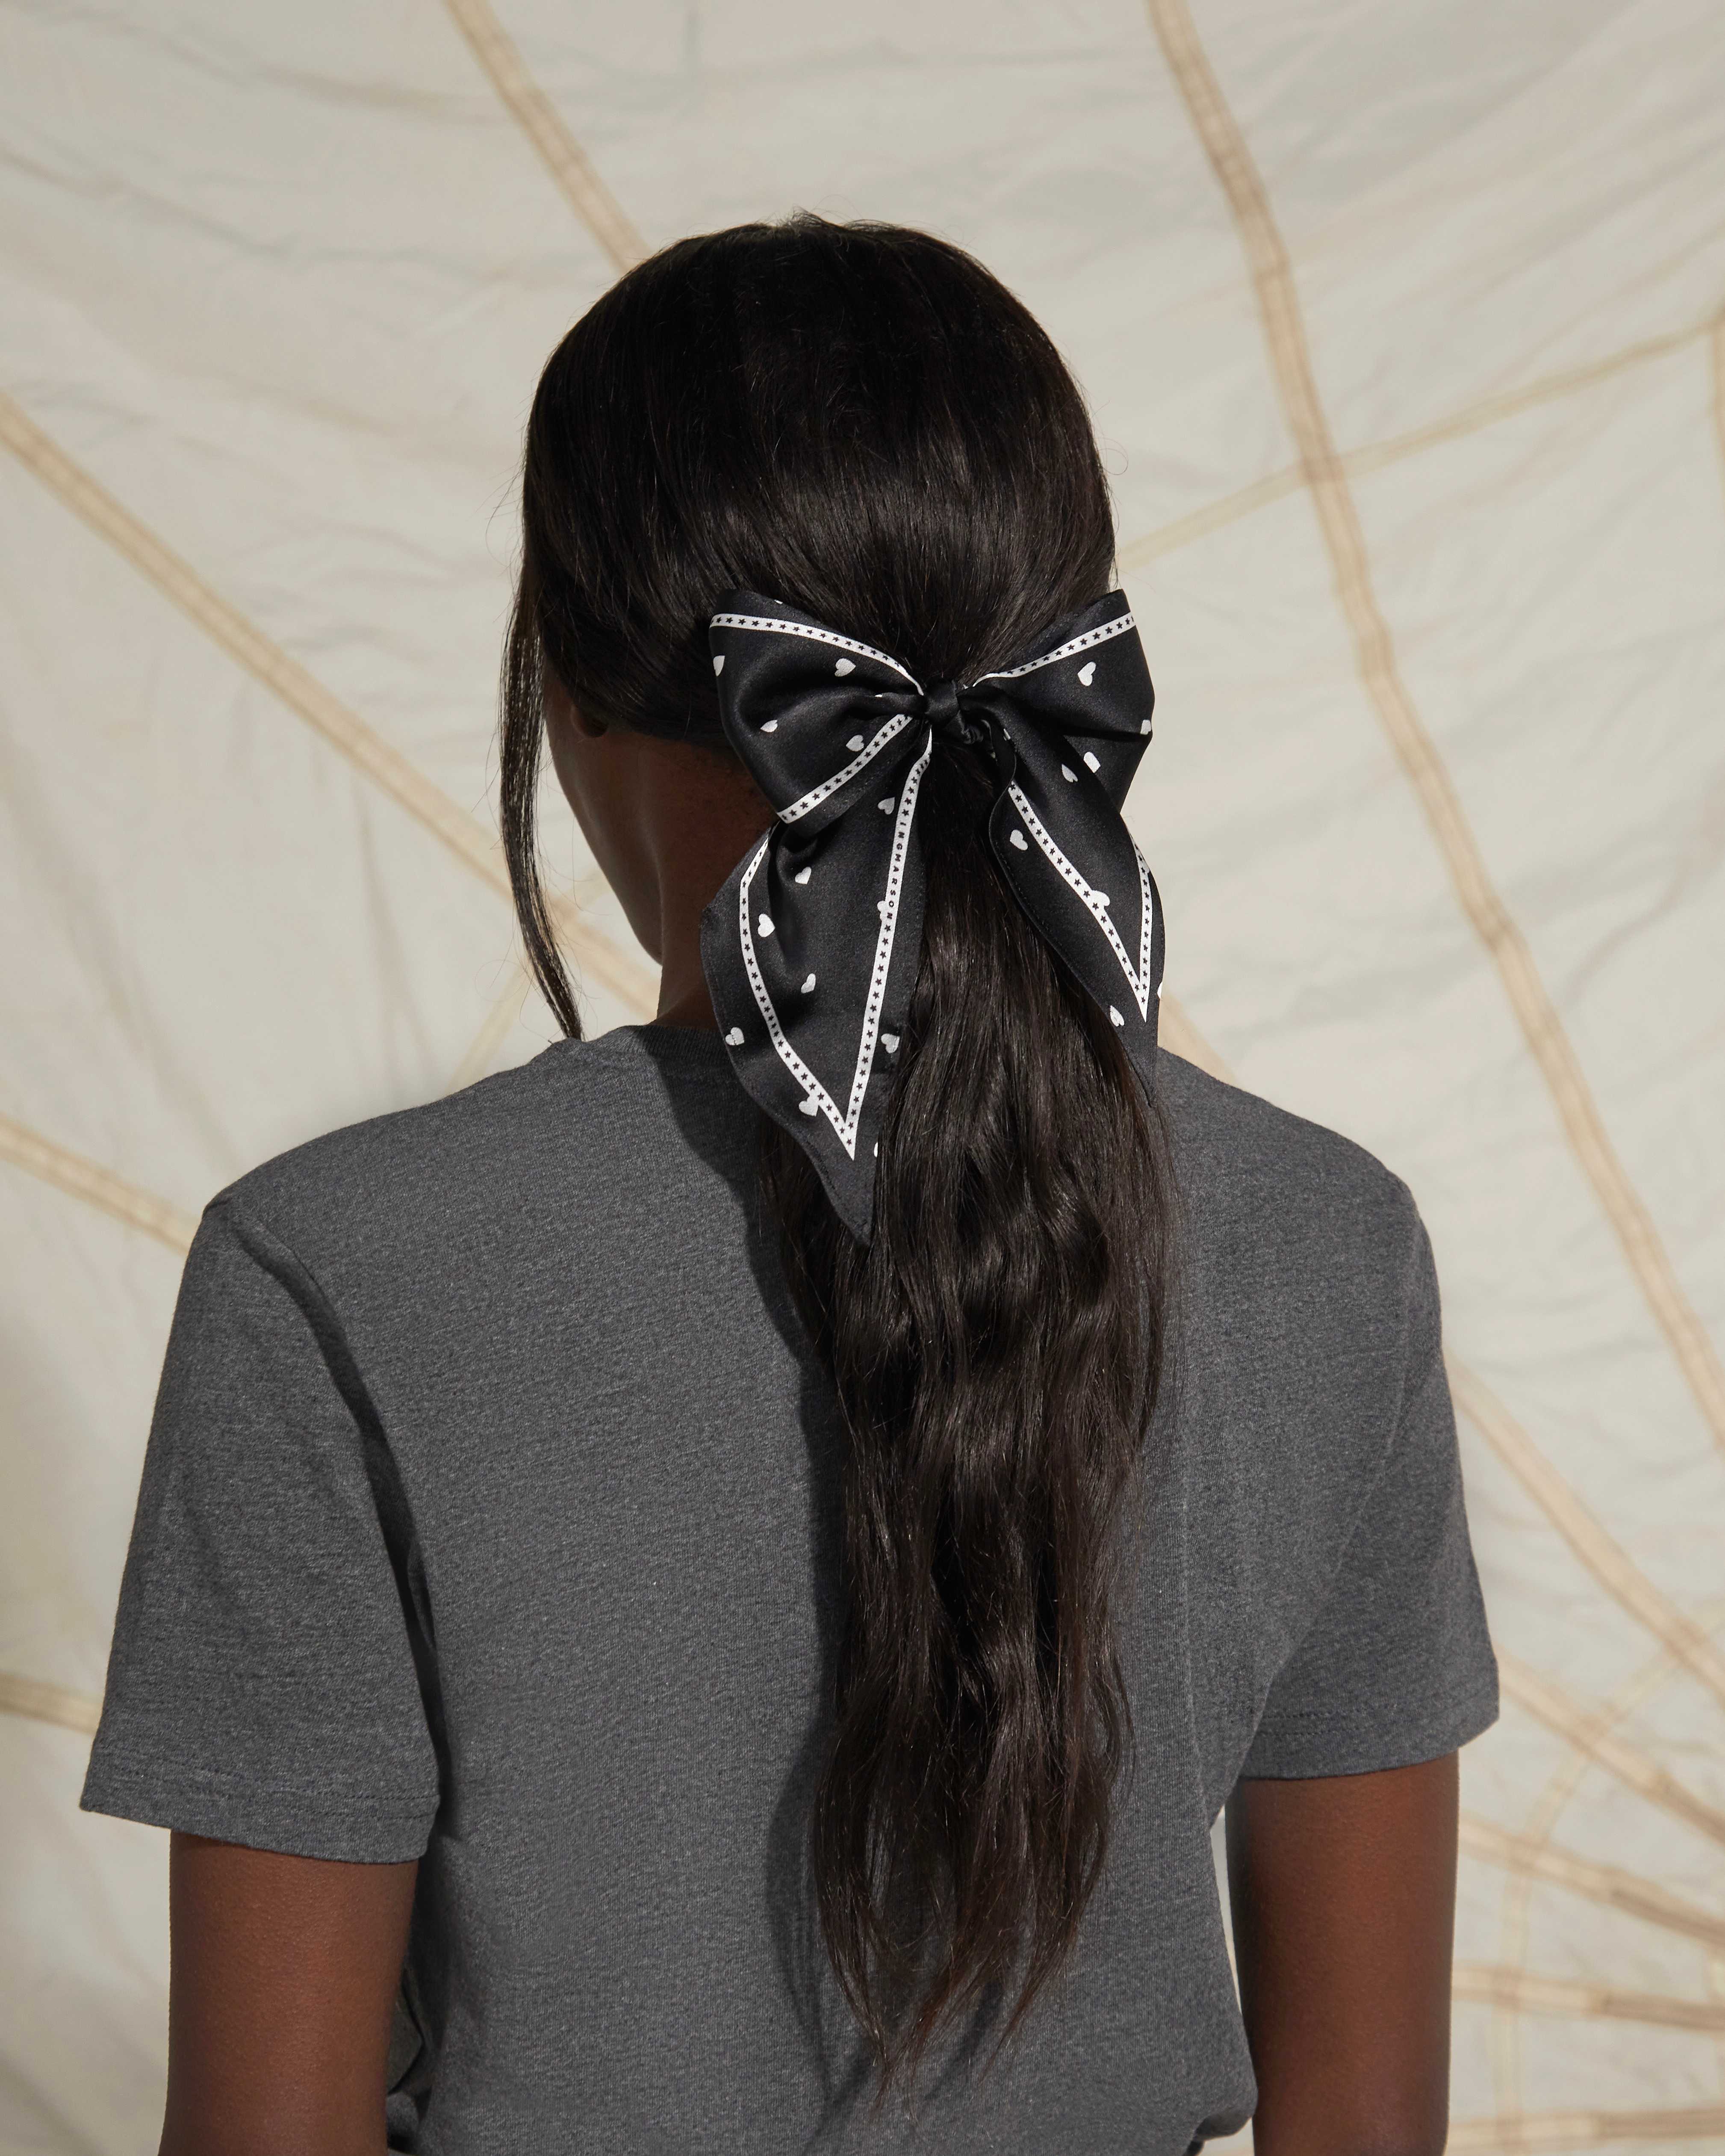 Women wearing a grey top and a black silk scarf in her hair tied as a bow